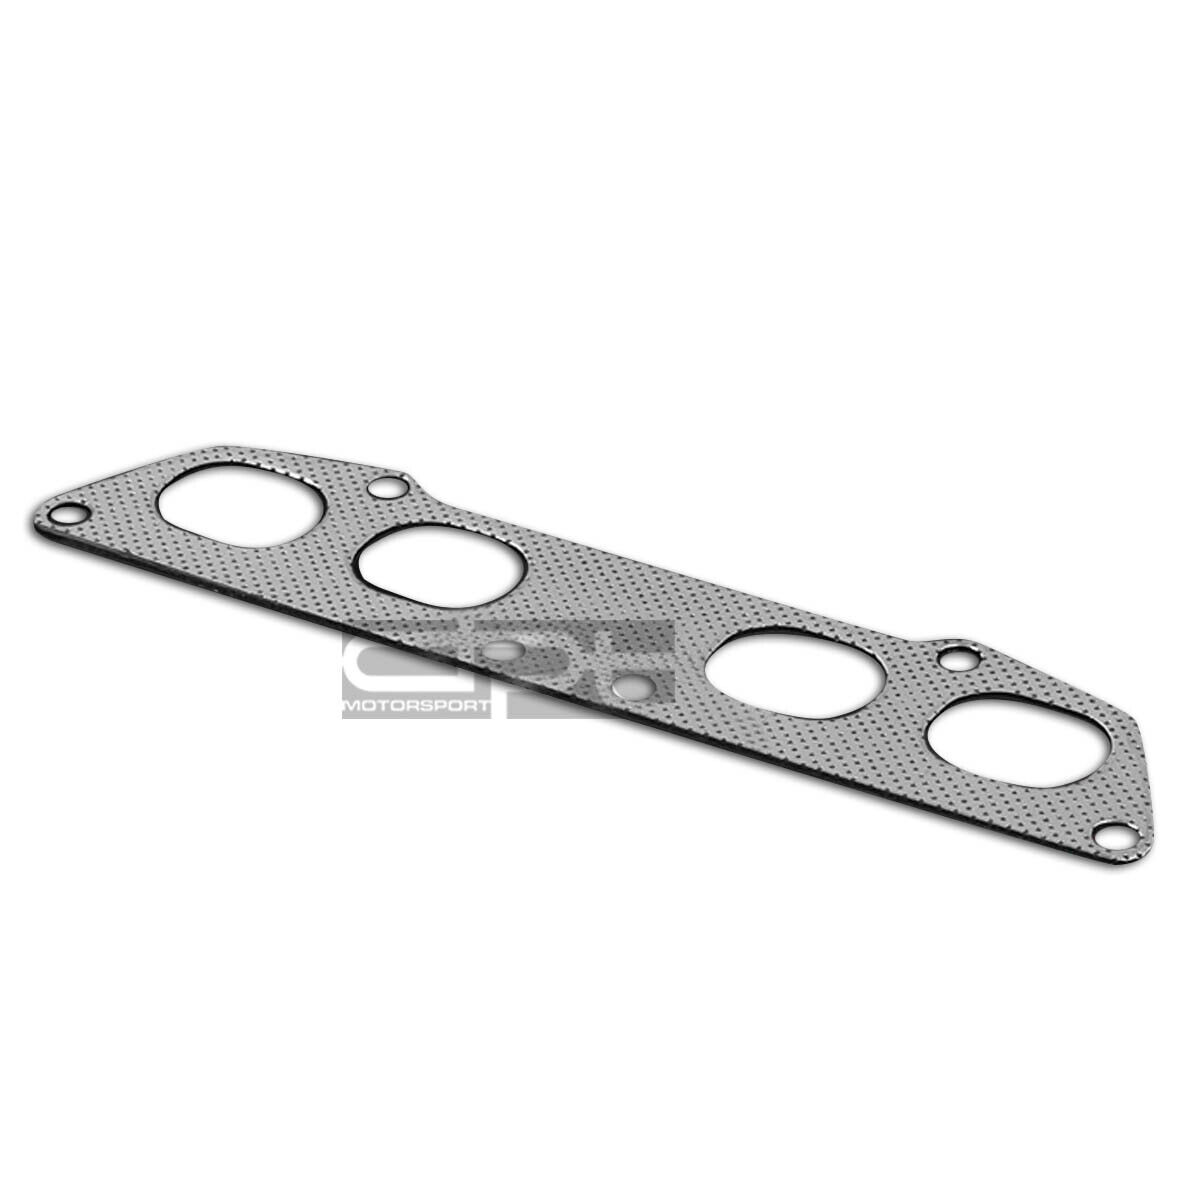 FOR 91-95 TOYOTA MR2 NON-TURBO ENGINE/EXHAUST MANIFOLD/HEADER ALUMINUM GASKET